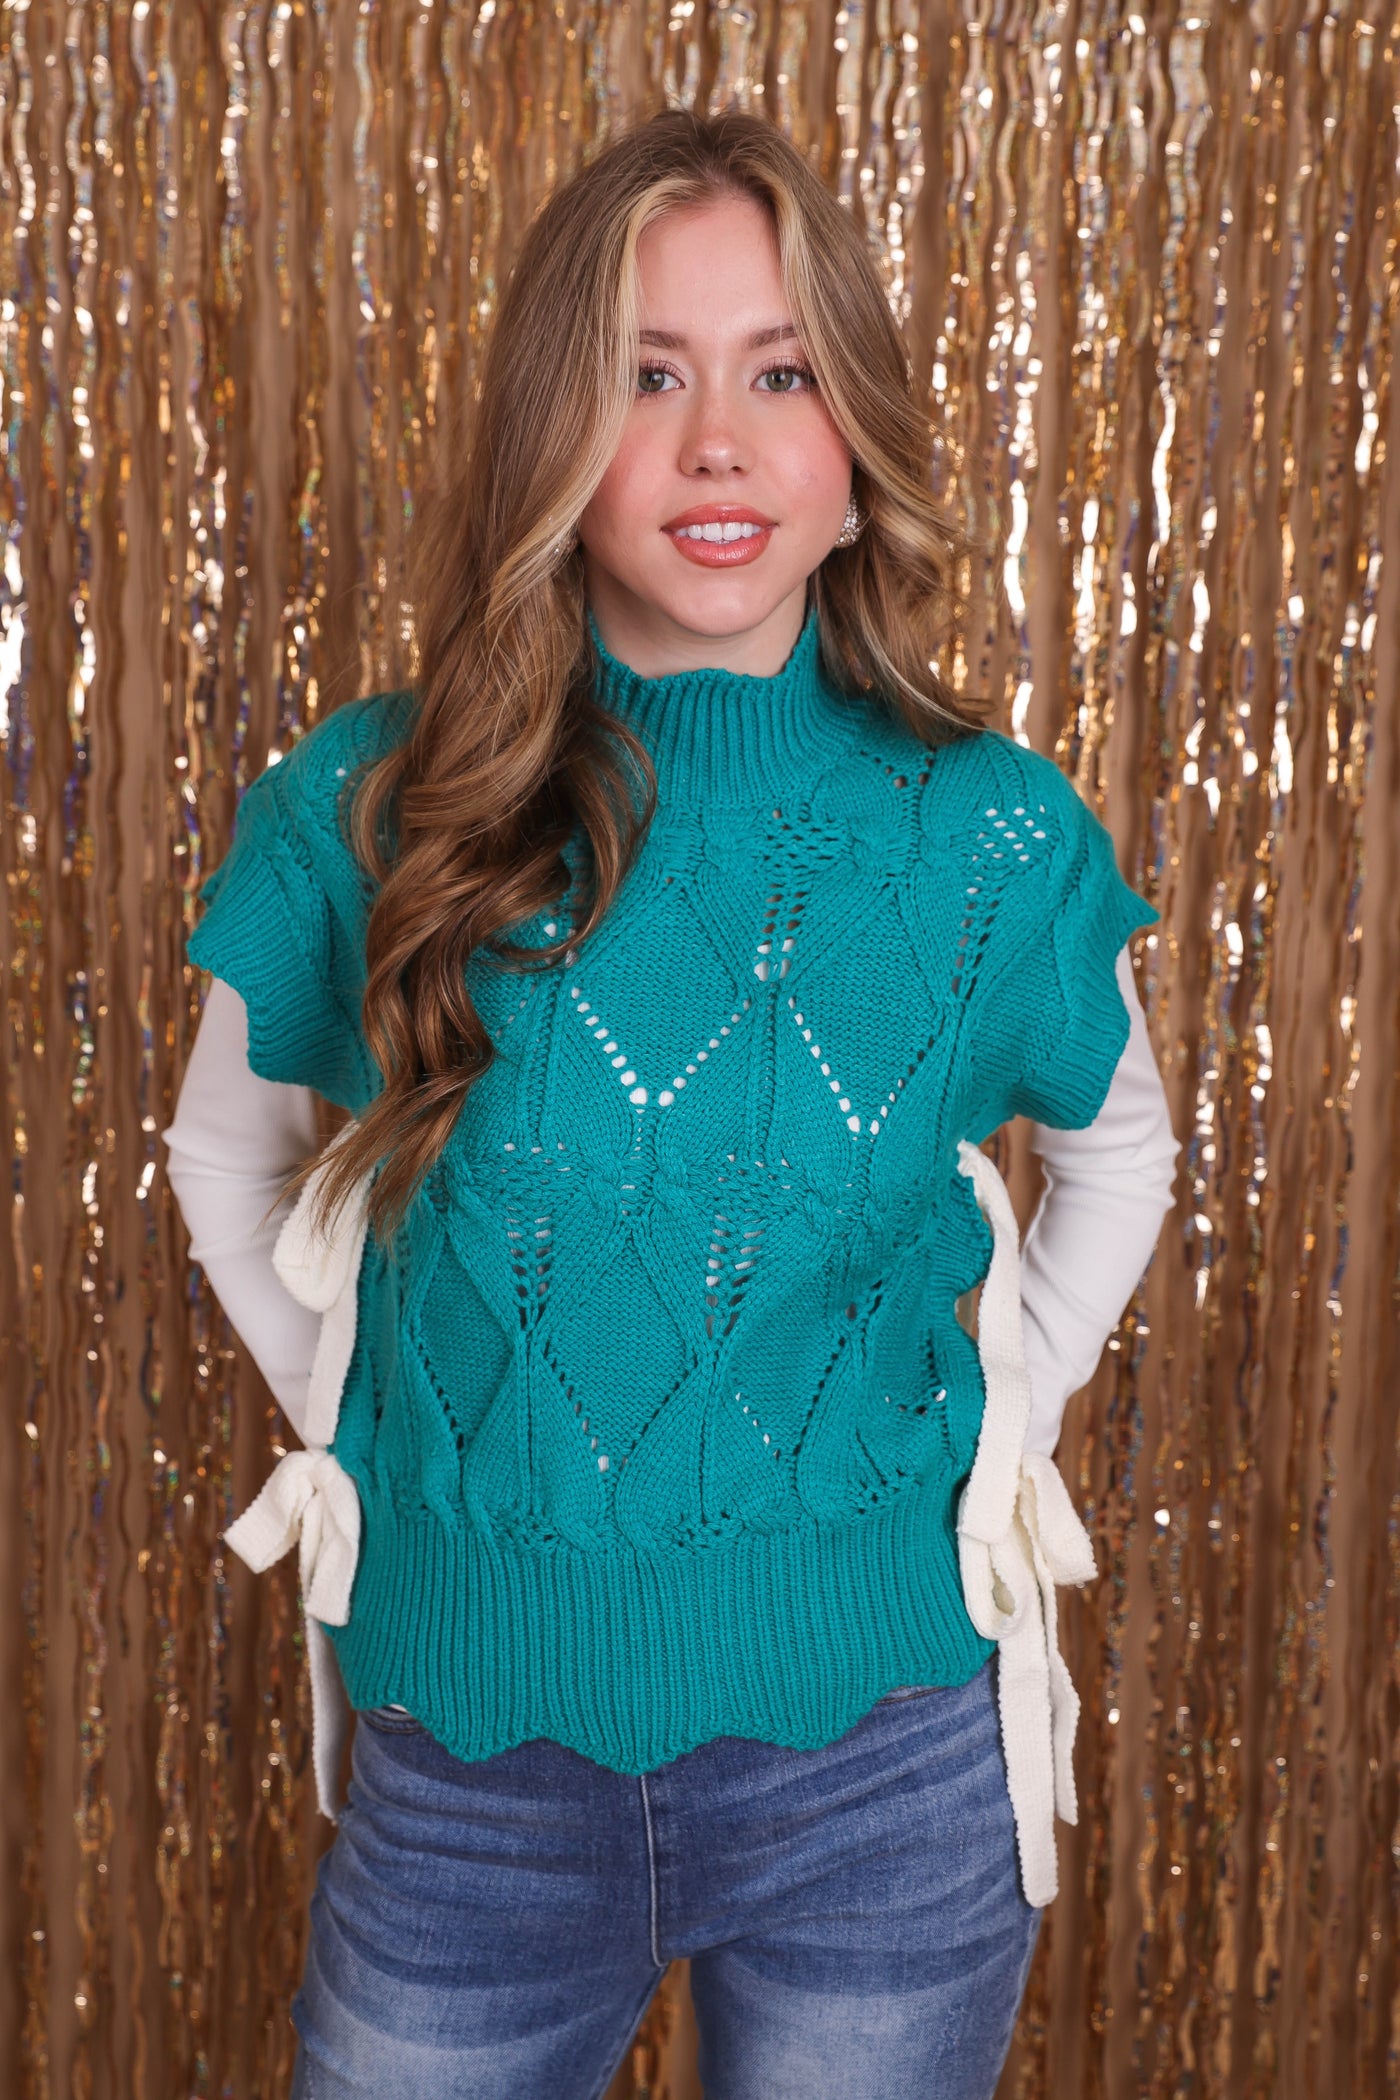 Women's Knit Sweater Vest- Women's Chic Scalloped Sweater With Bows- &Merci Sweaters